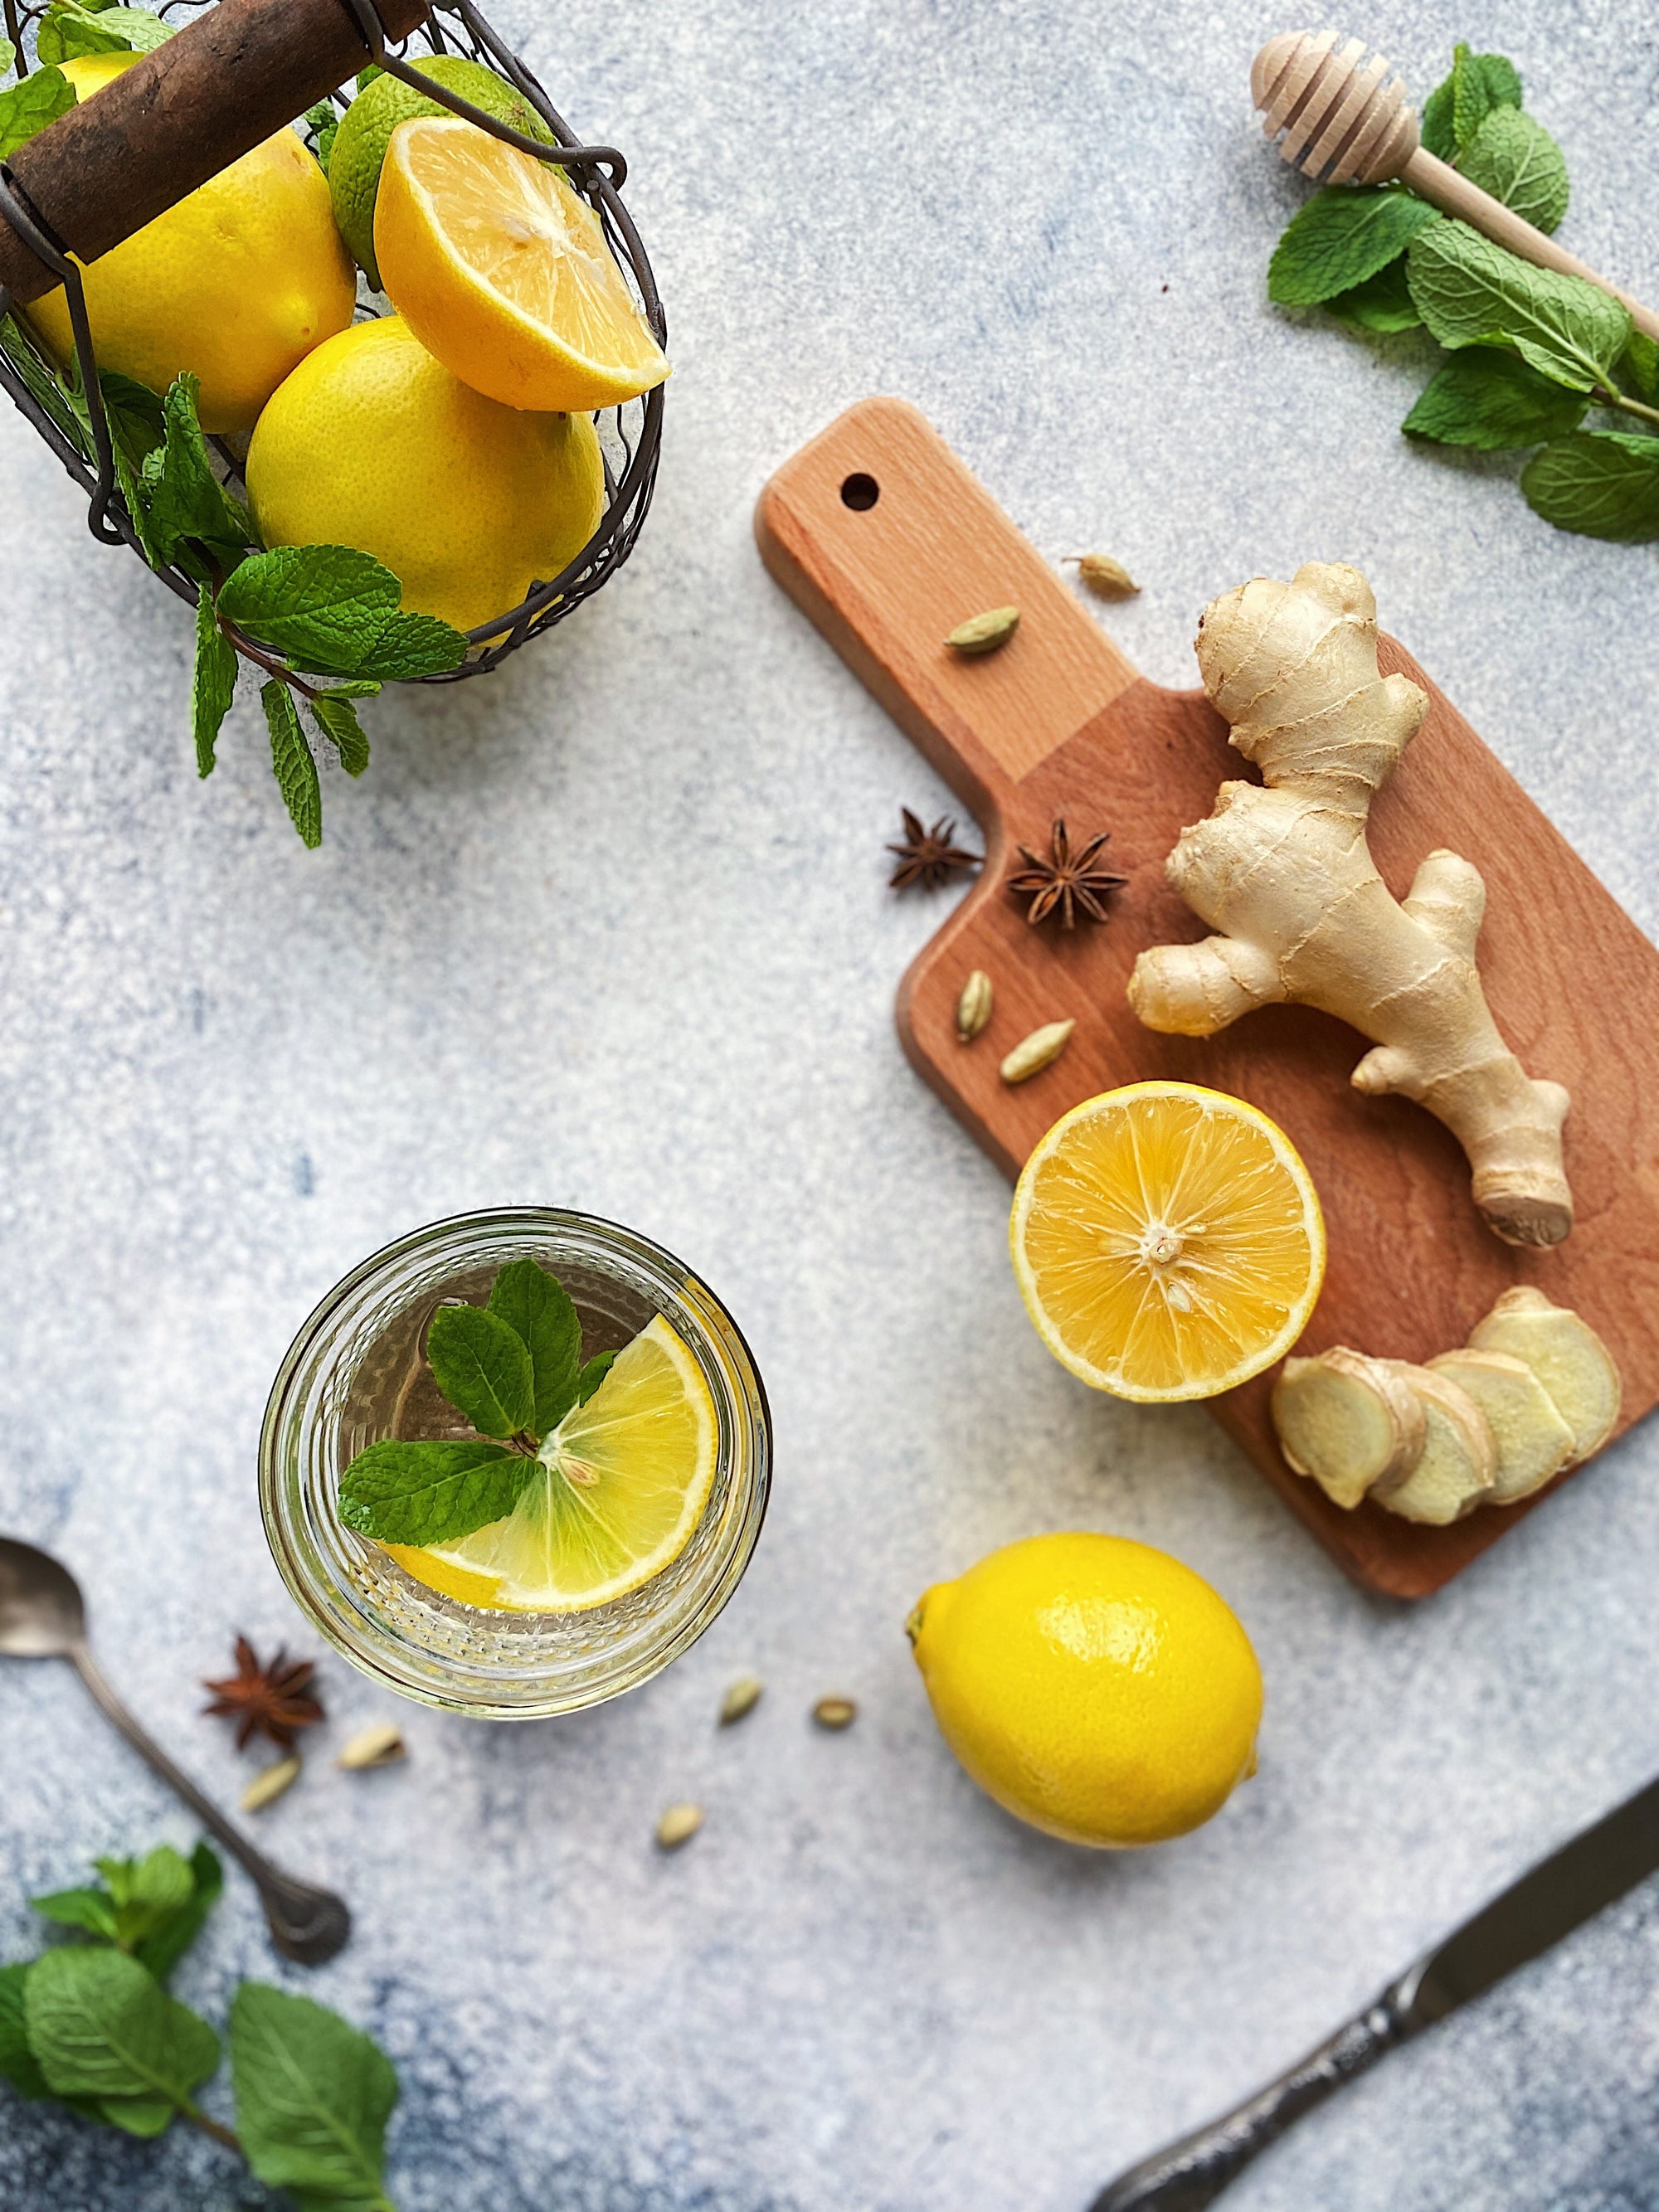 Turmeric and Ginger - Getting at the Root of Their Health Benefits